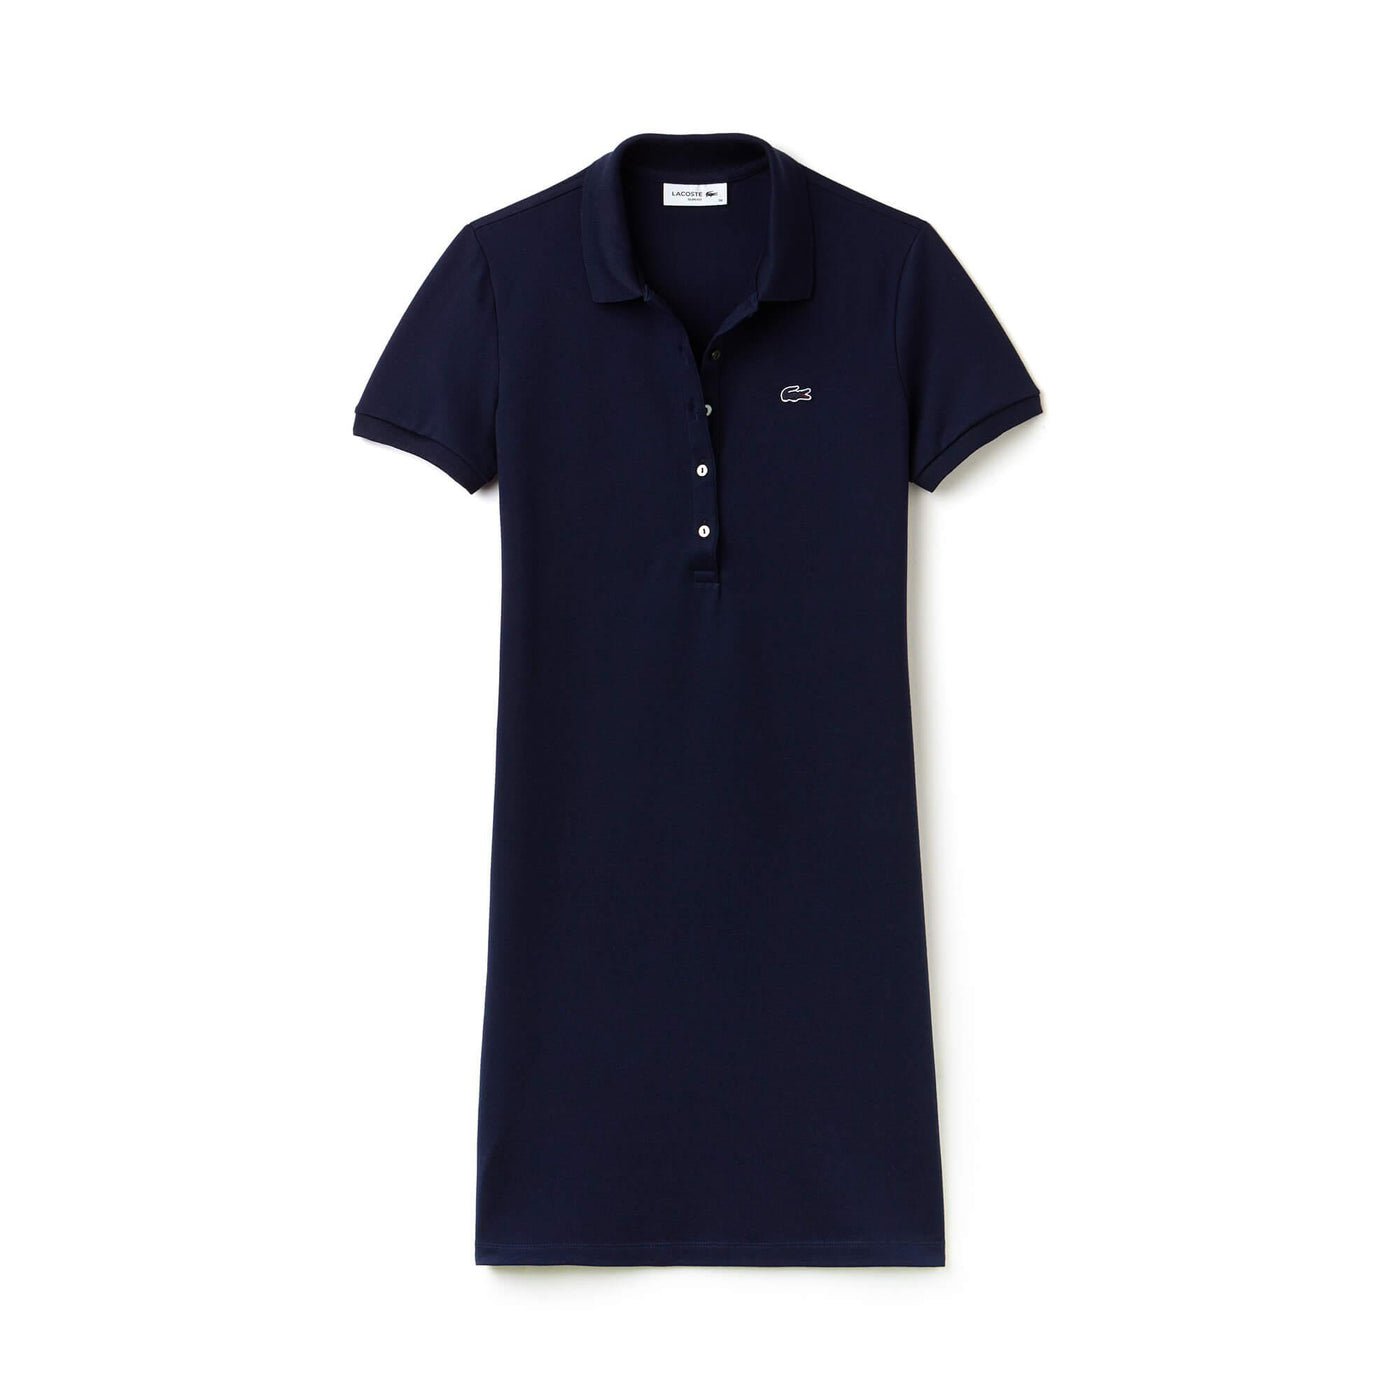 Shop The Latest Collection Of Outlet - Lacoste Women'S Stretch Cotton Mini Piquã© Polo Dress - Ef8470 In Lebanon